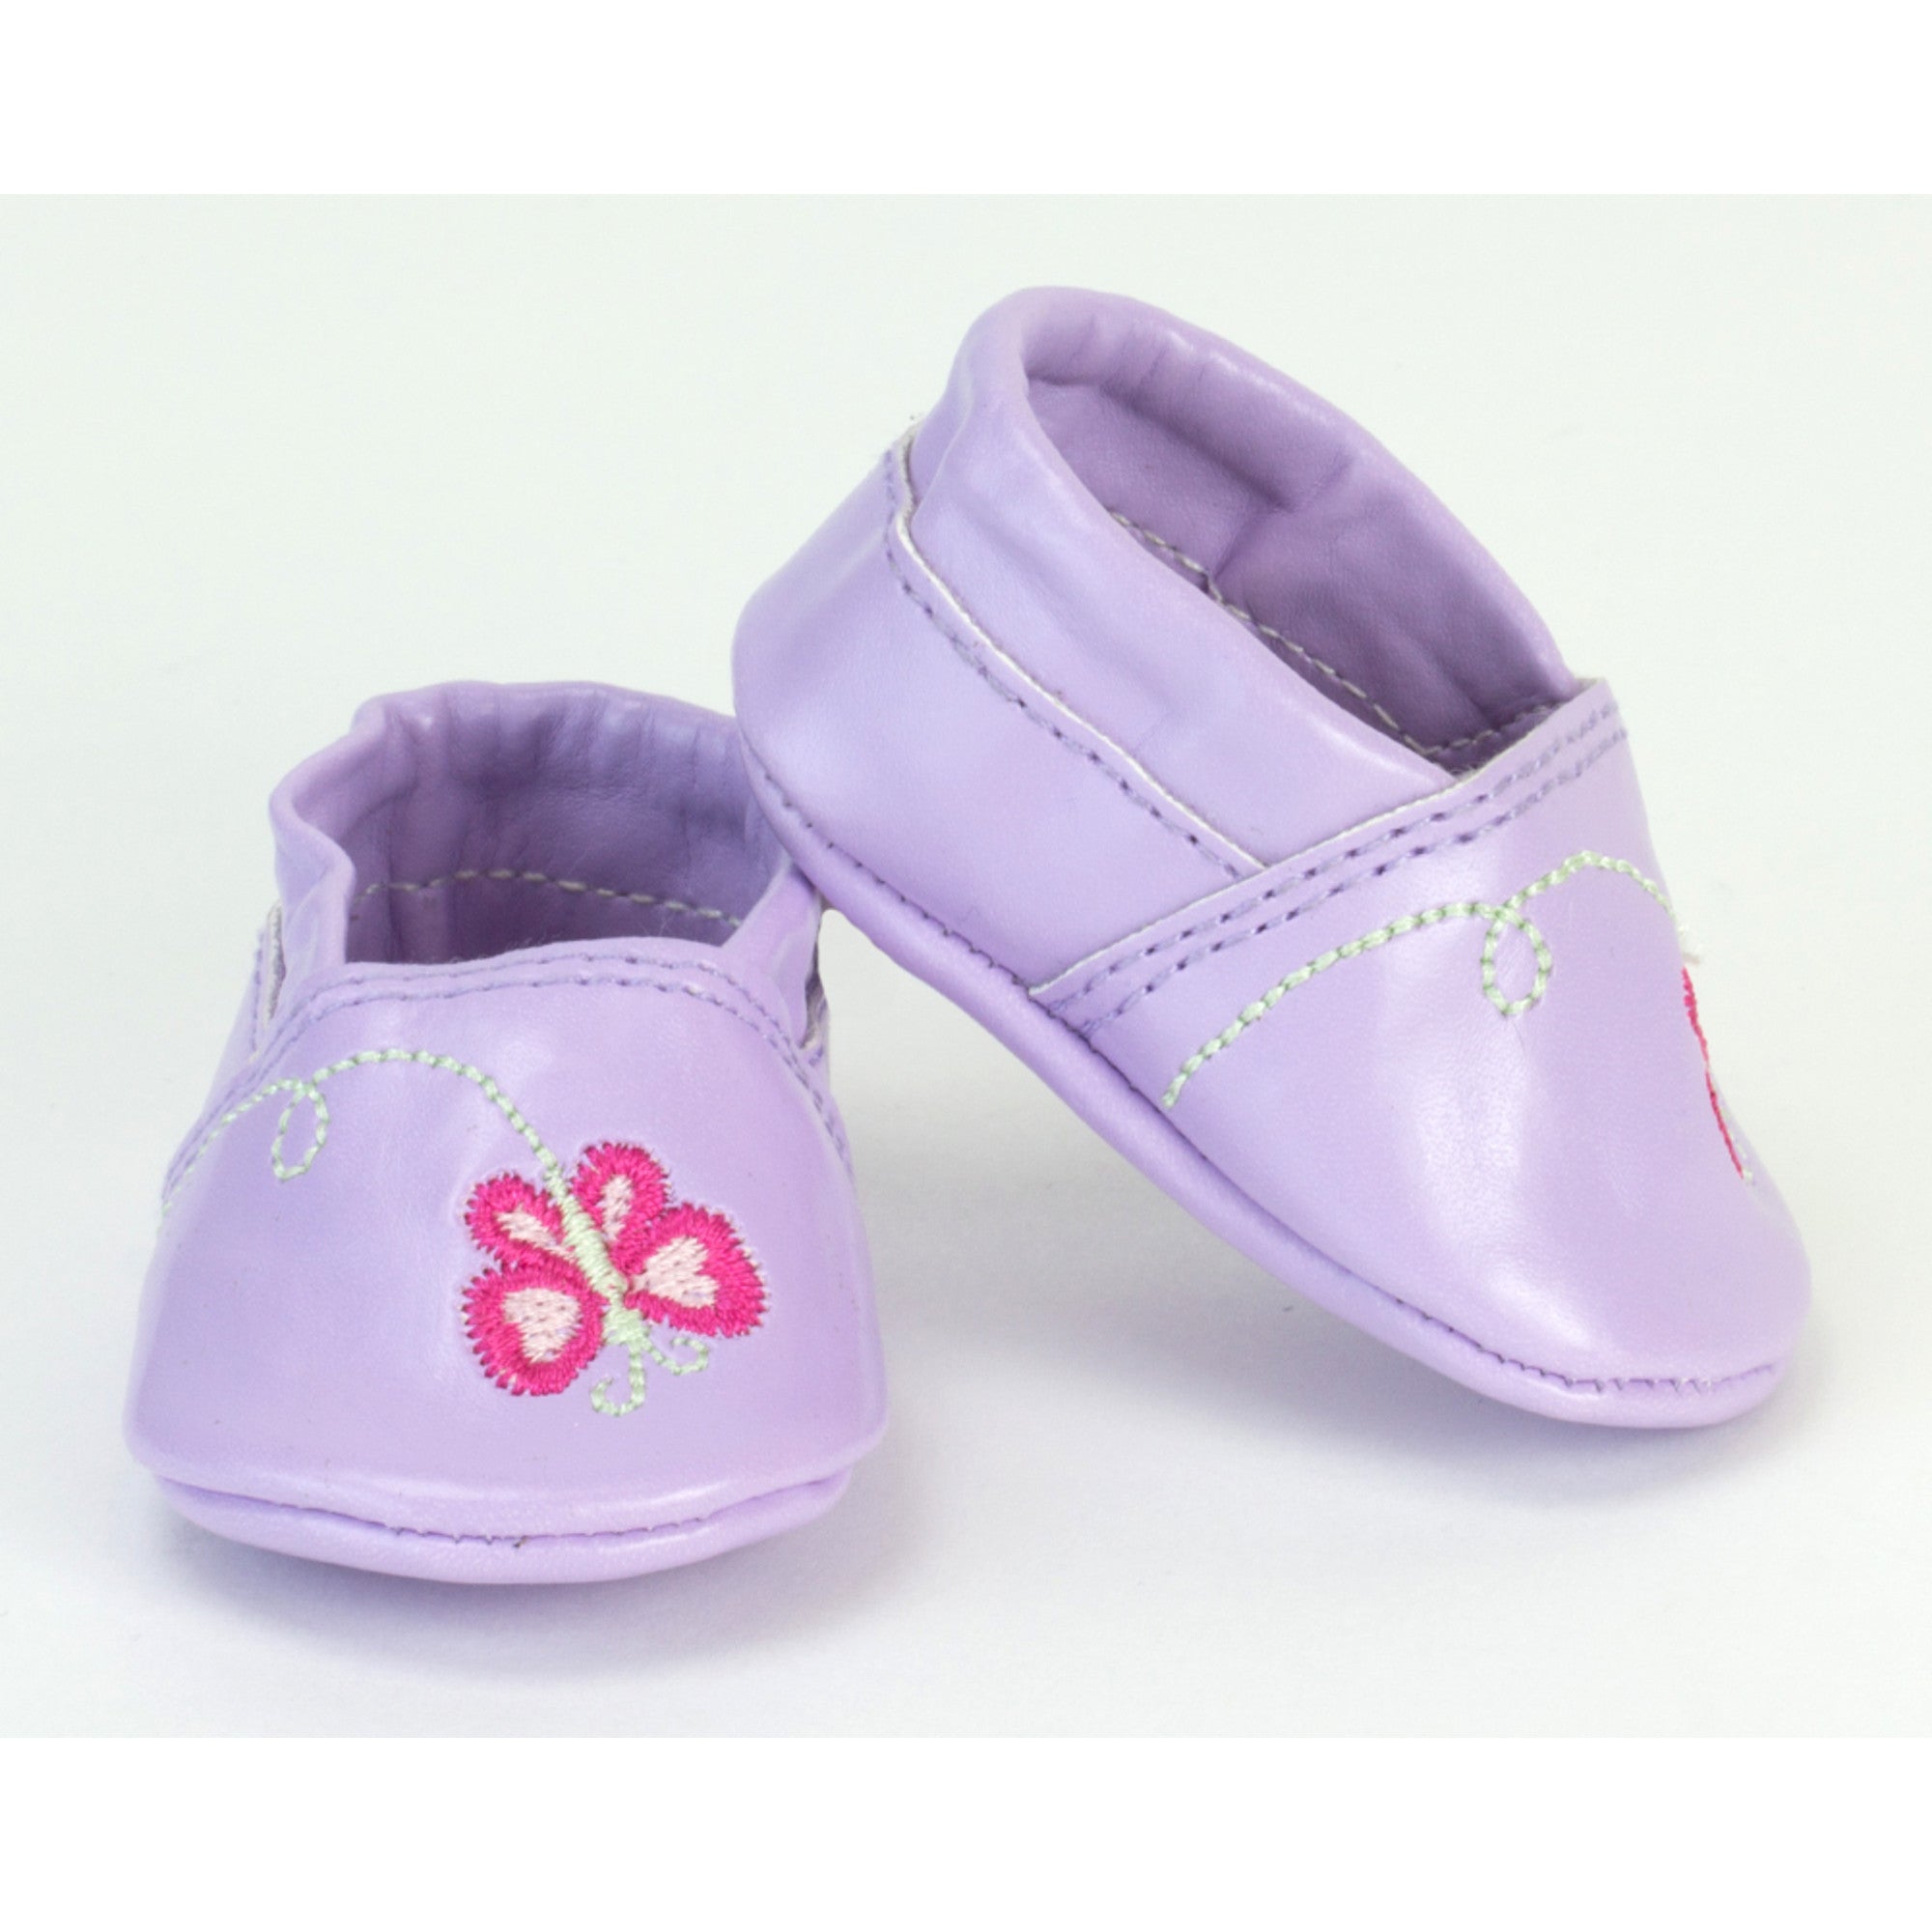 Sophia’s Solid-Colored Vegan Leather Slip-On Soft Sole Baby Shoes with Pink & White Butterfly Embroidery for 18” Dolls, Lavender